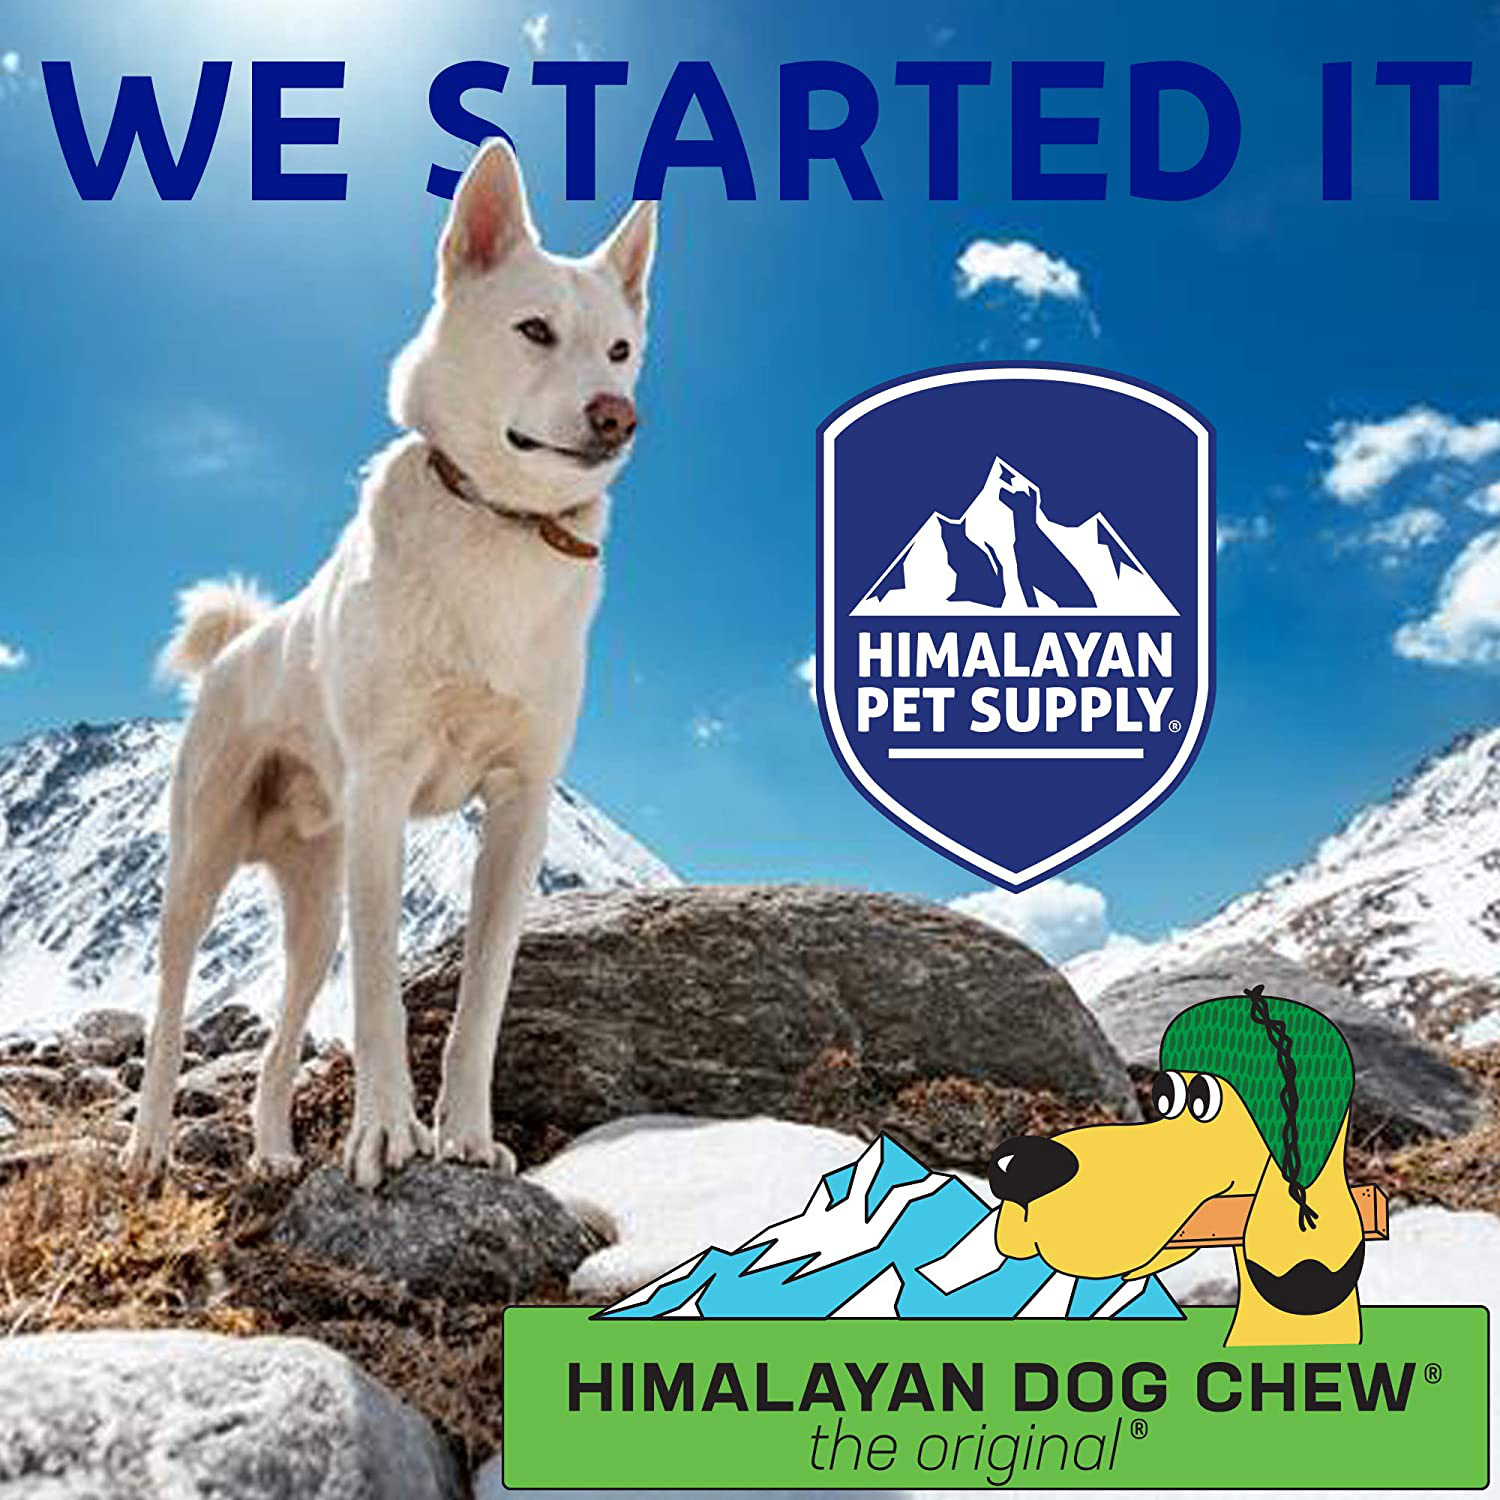 Himalayan Yak Cheese Dog Chews | the Original Himalayan Hard Cheese Dog Chew | 100% Natural, Healthy & Safe | No Lactose, Gluten or Grains | MIXED SIZES | for Dogs 65 Lbs & Smaller Animals & Pet Supplies > Pet Supplies > Dog Supplies > Dog Treats Himalayan Dog Chew   